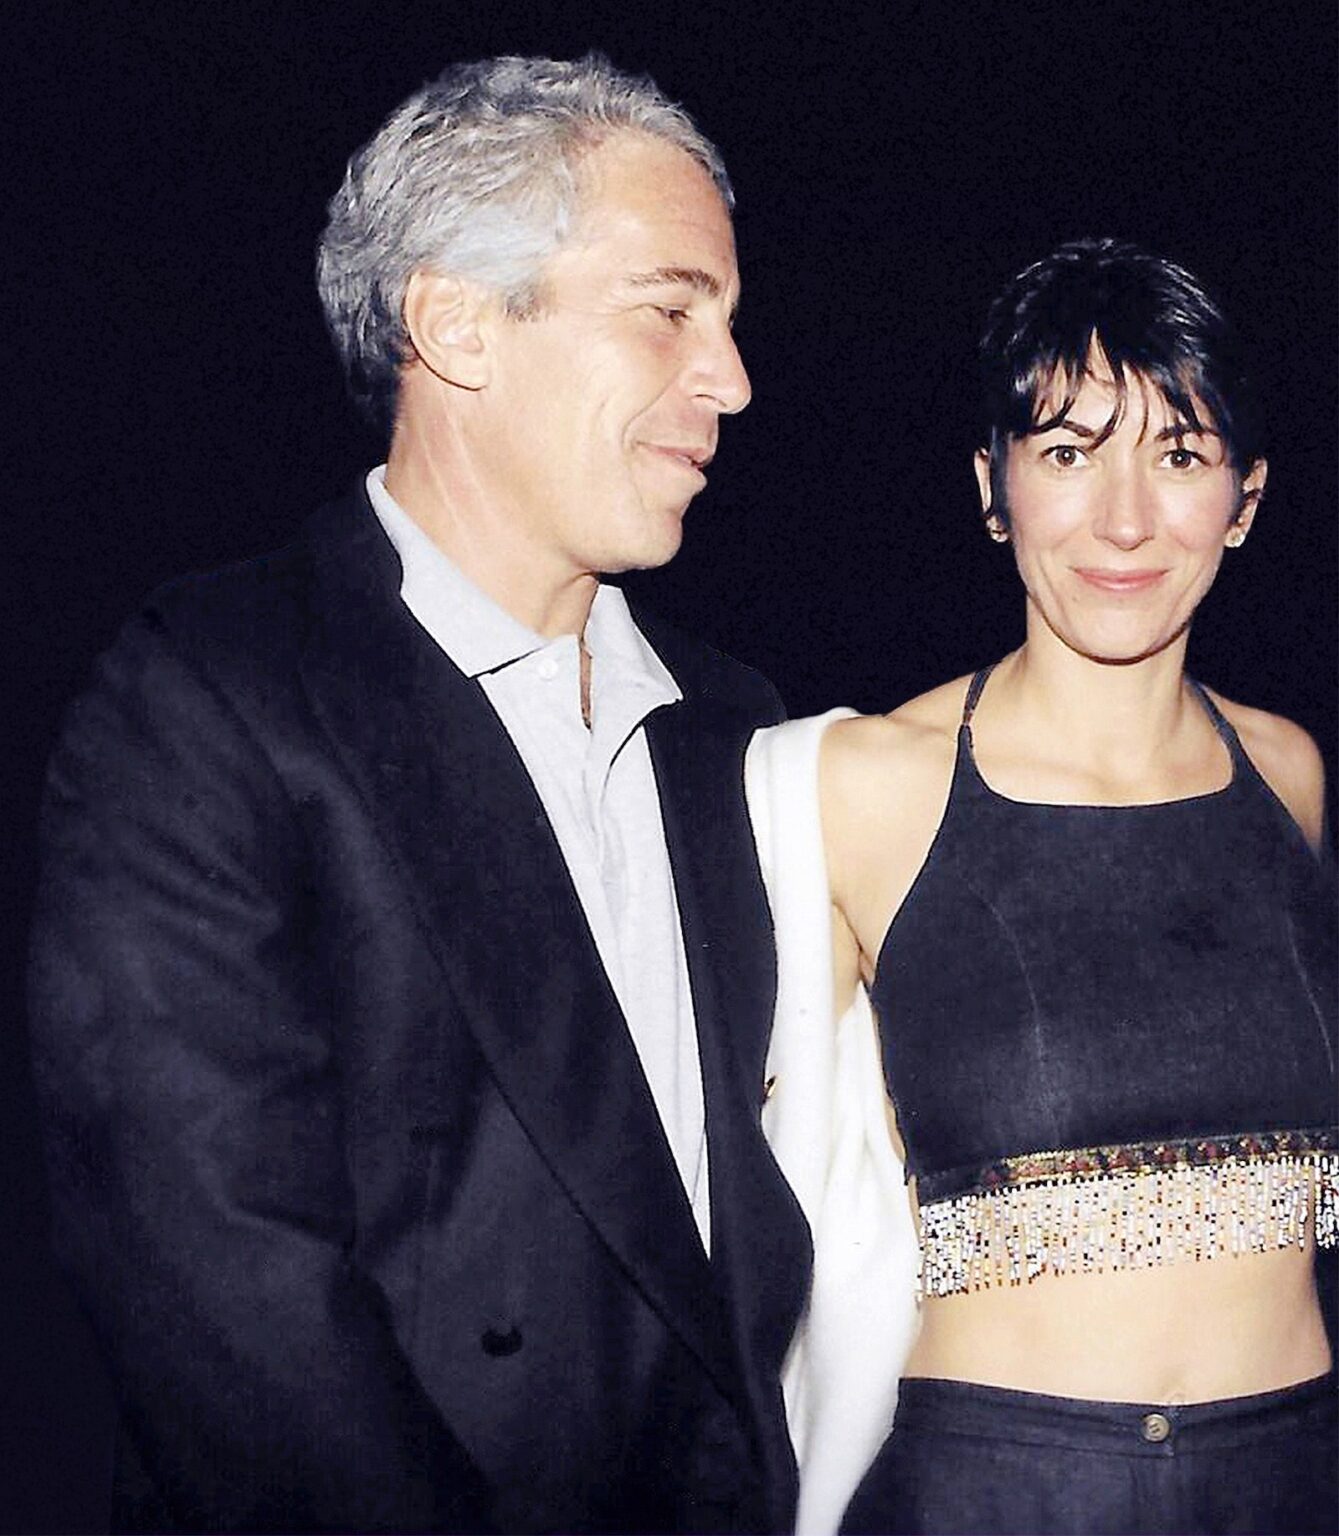 Alleged sex-trafficker and Jeffrey Epstein companion Ghislaine Maxwell has requested a closed-door bail hearing. Is there a chance she'll get out in 2020?